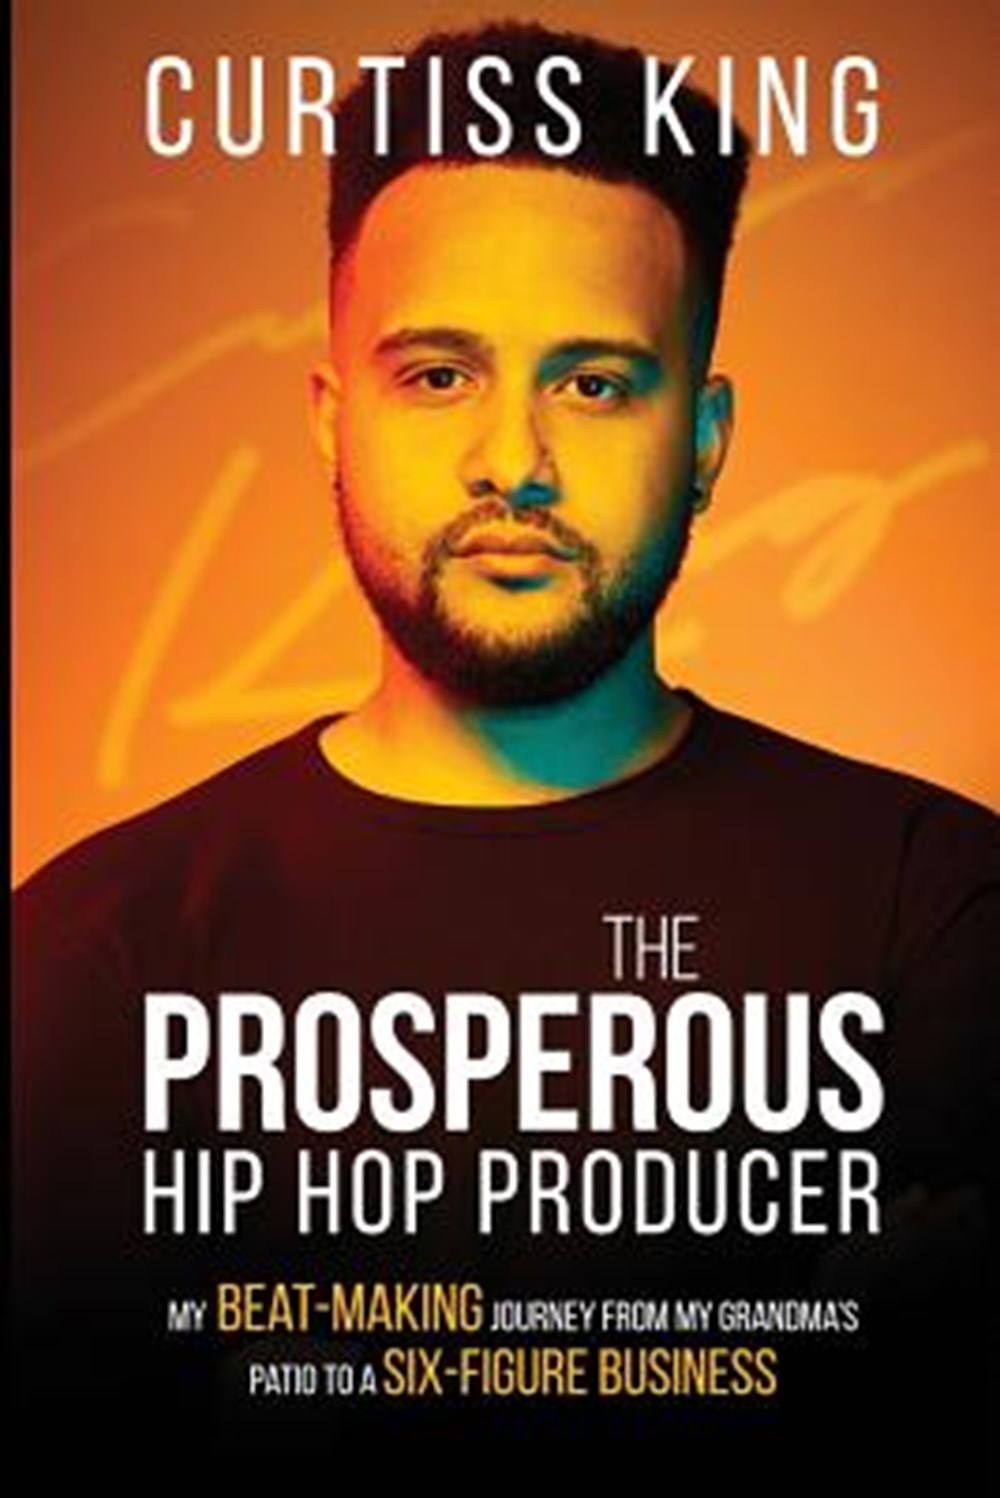 Prosperous Hip Hop Producer My Beat-Making Journey from My Grandma's Patio to a Six-Figure Business